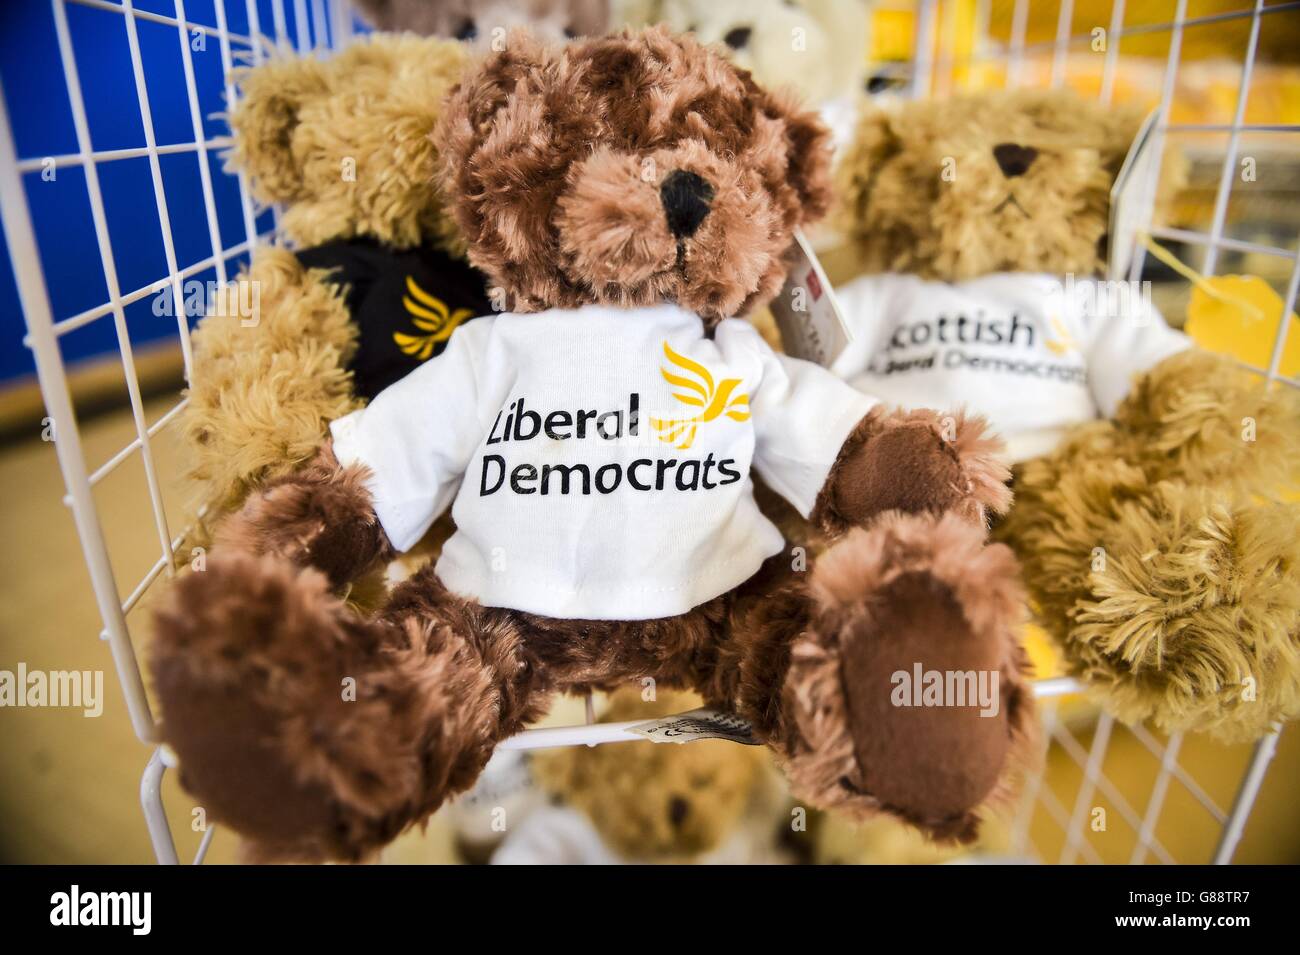 Liberal Democrats teddy bears on a stall at the Liberal Democrats annual conference at Bournemouth International Centre. Stock Photo